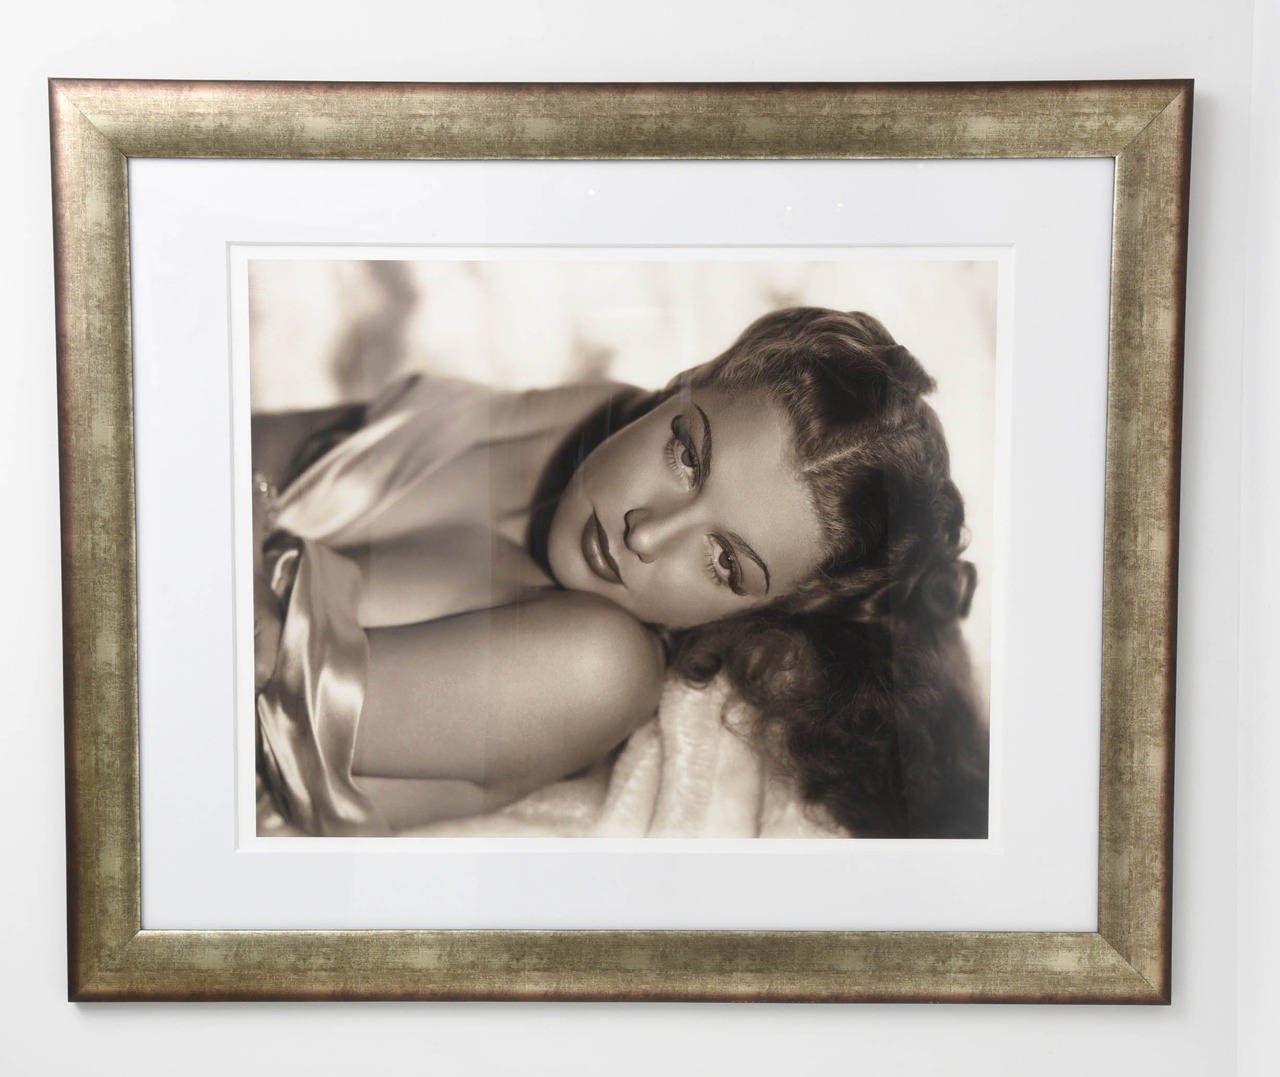 This iconic photograph of the Hollywood actress Ann Sheridan was originally taken in the 1930's by George Hurrell the glamour portraitist, whose mesmerizing photographs filled the pages of Vogue and Vanity Fair, also worked as the head of the MGM